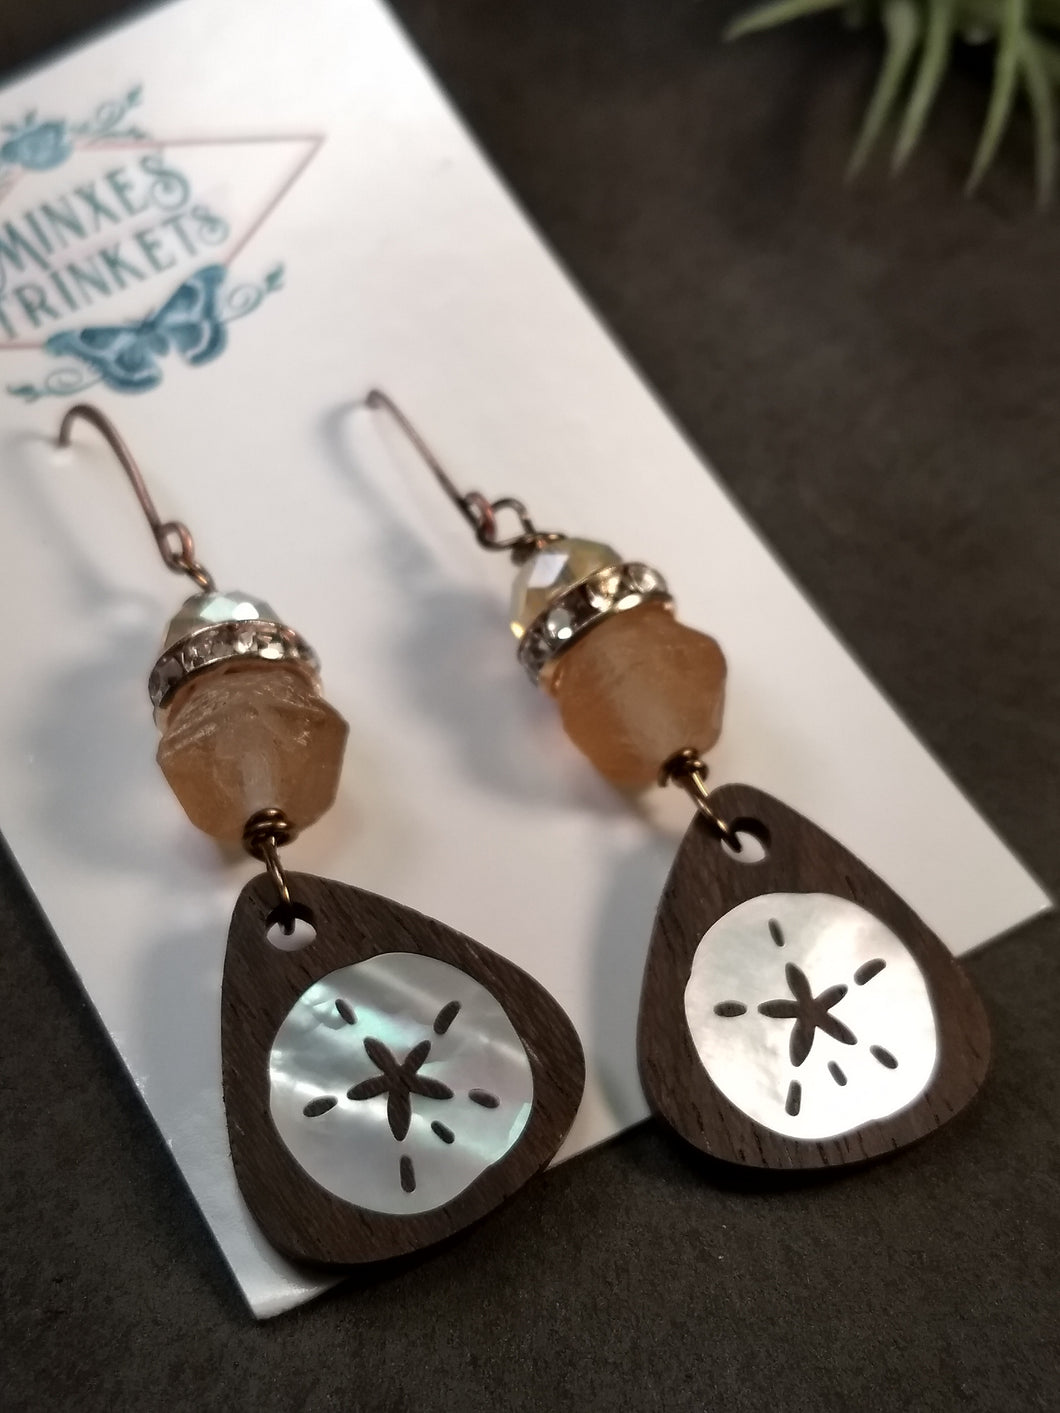 Handcrafted Mother-of-Pearl Inlay Earrings - Sand Dollar - Minxes' Trinkets